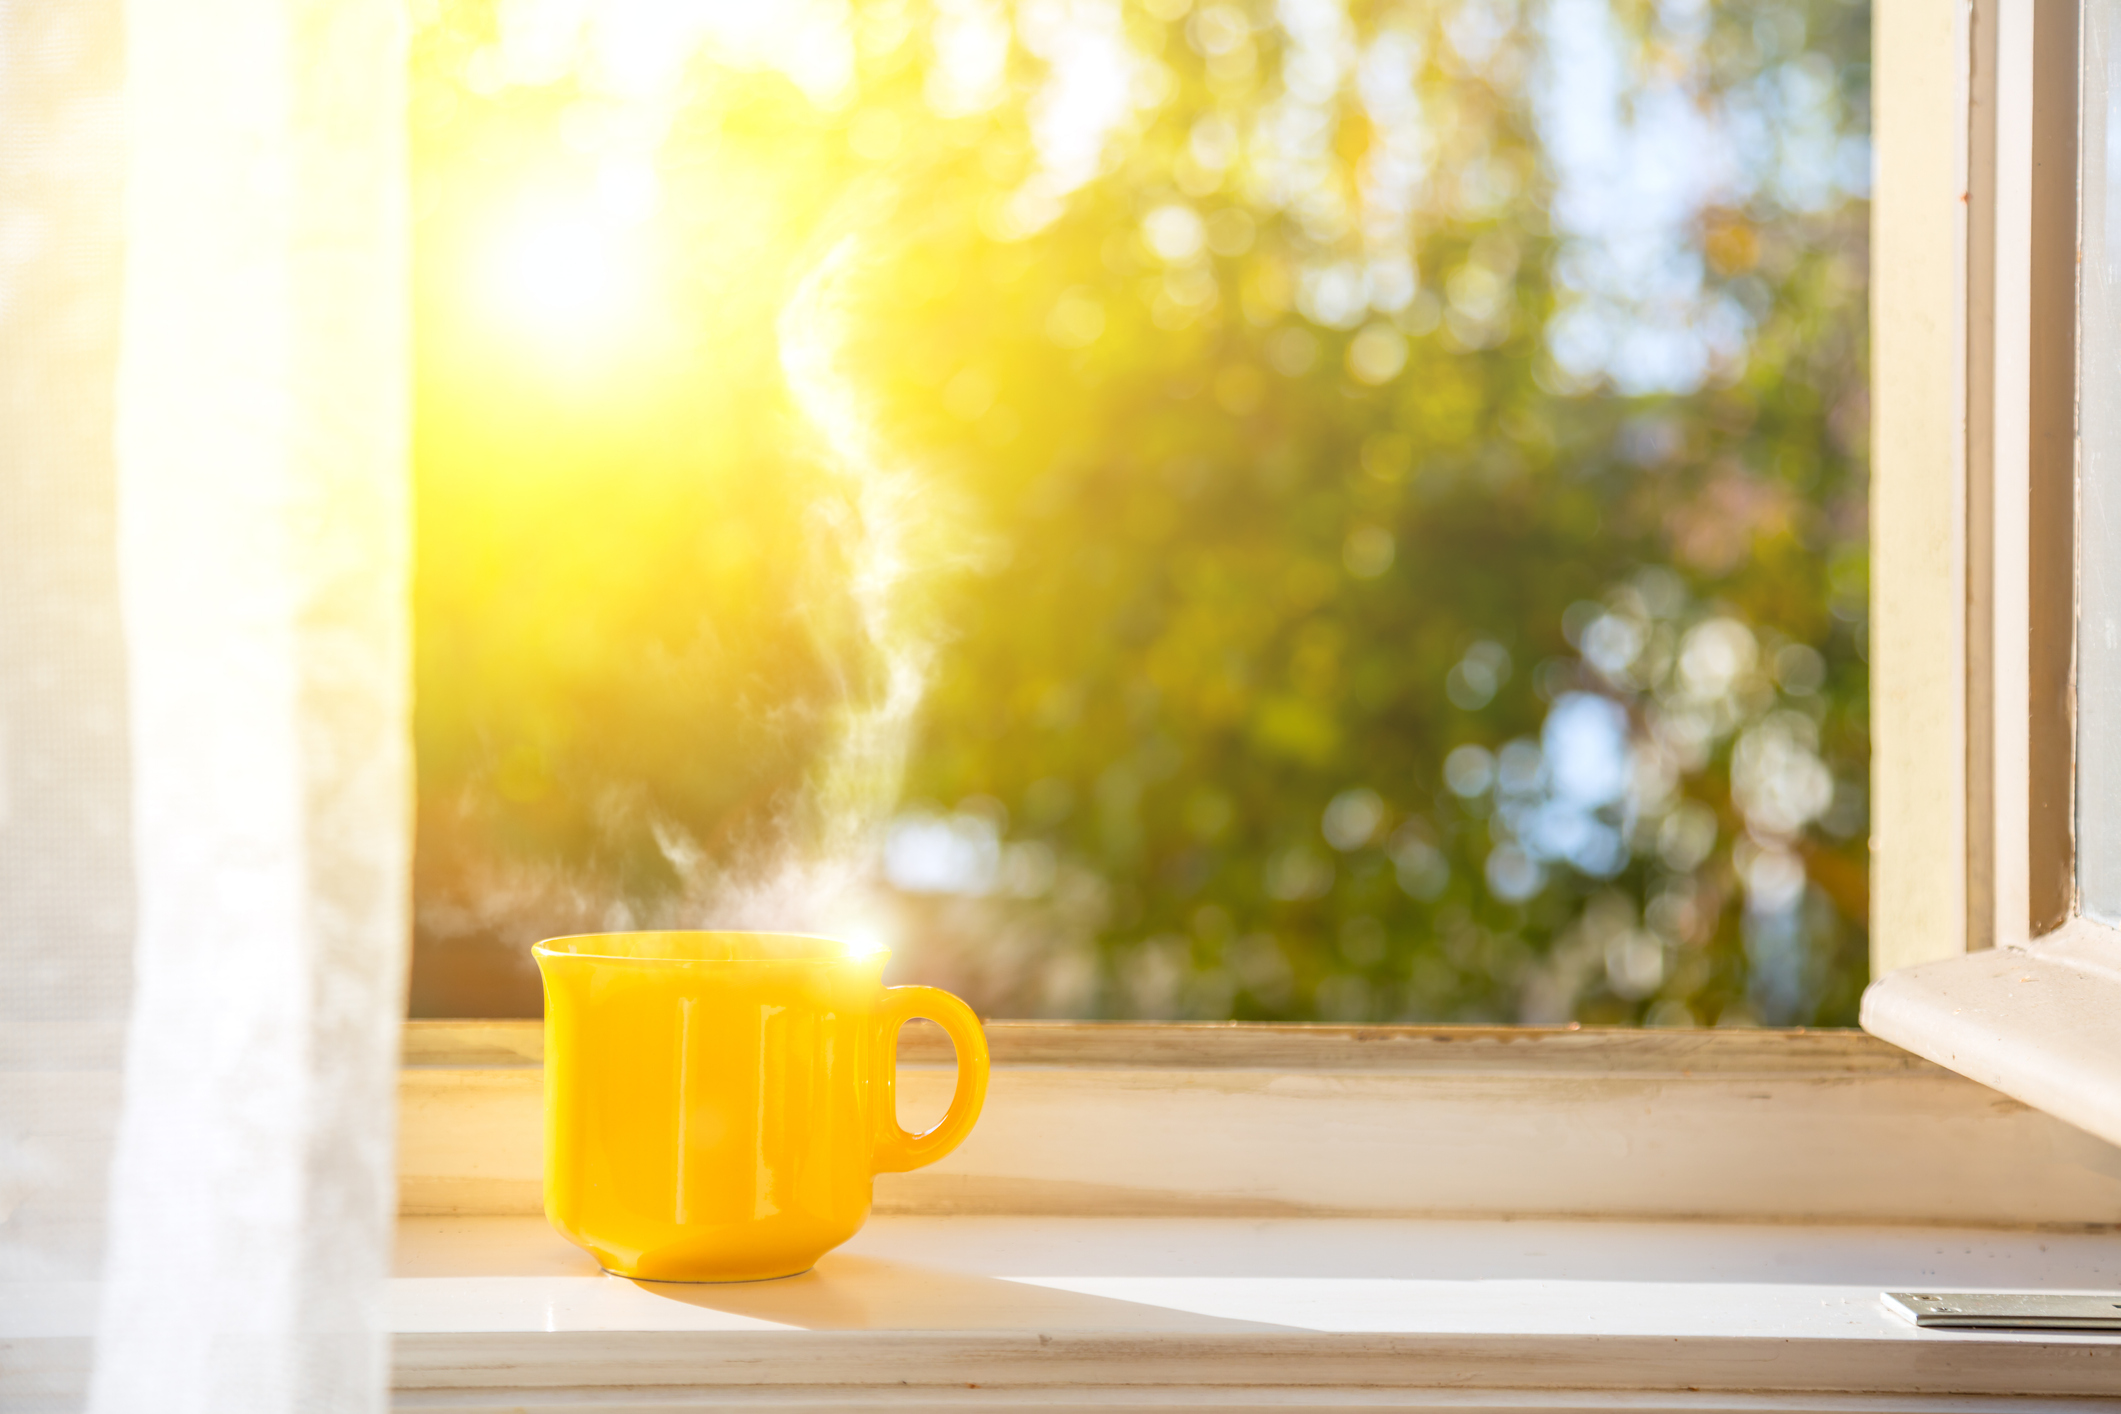 An image of a morning cup of coffee on a window sill with defocused nature background.